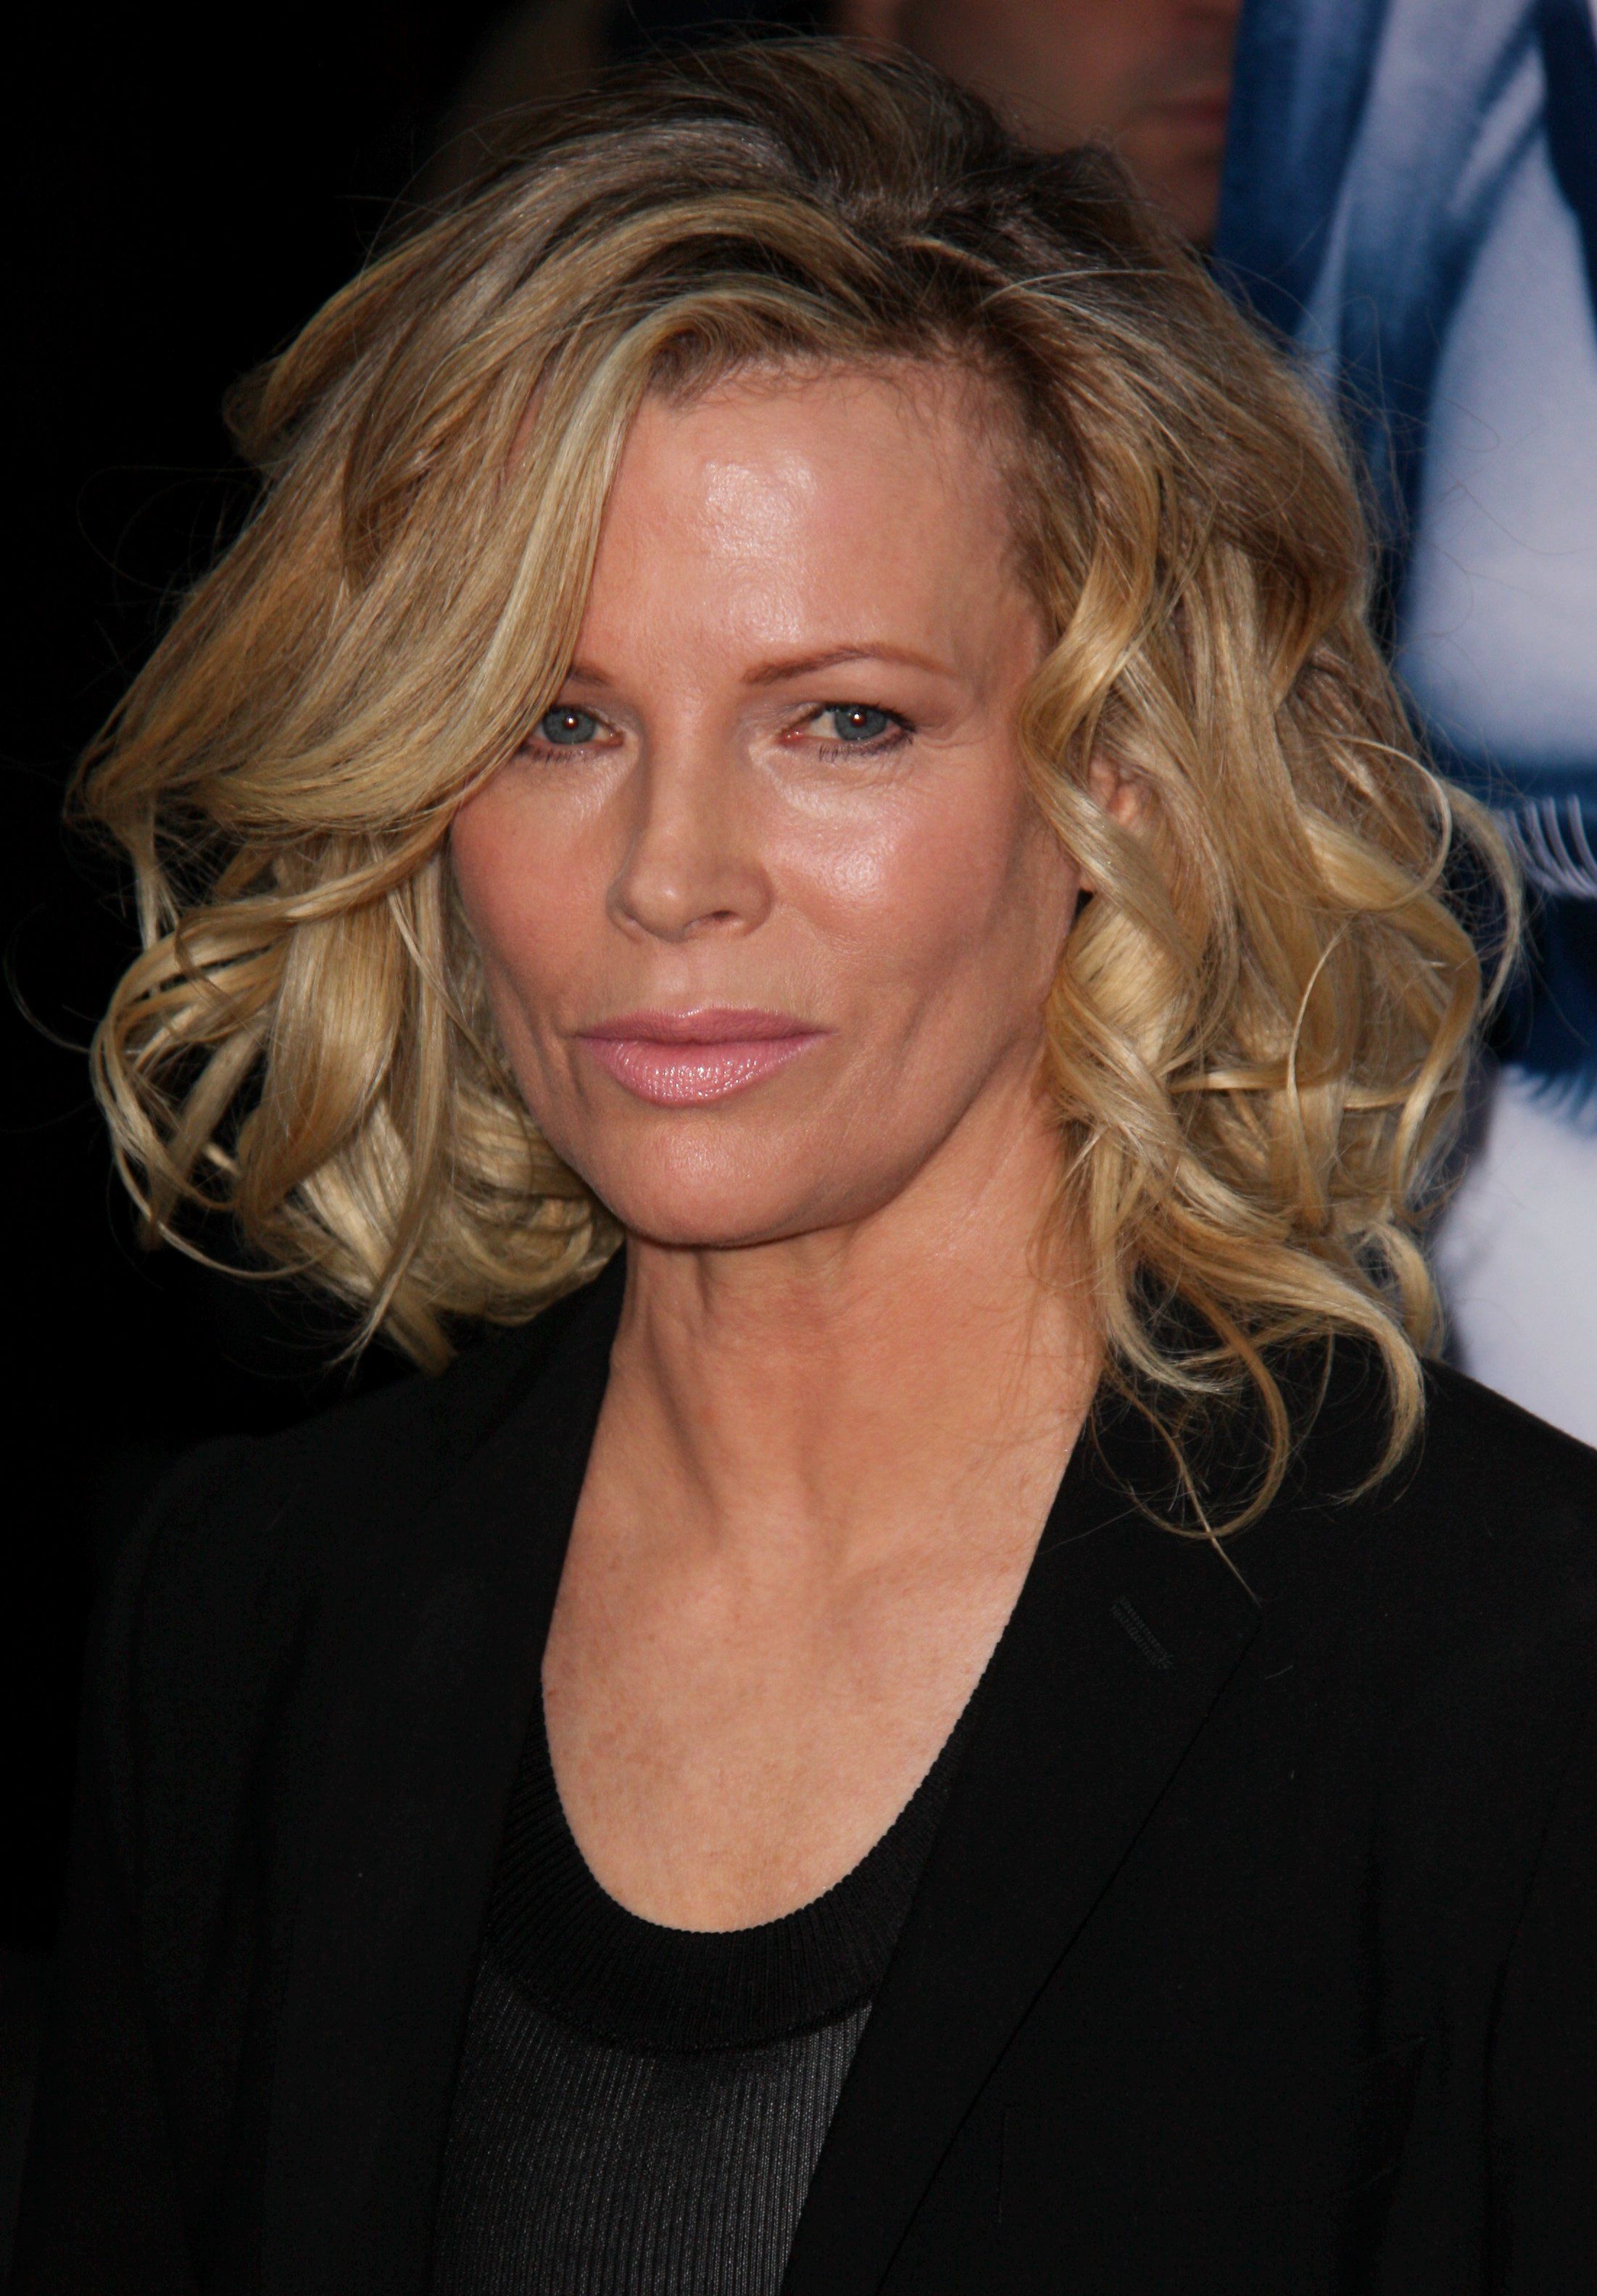 Pictures of Kim Basinger